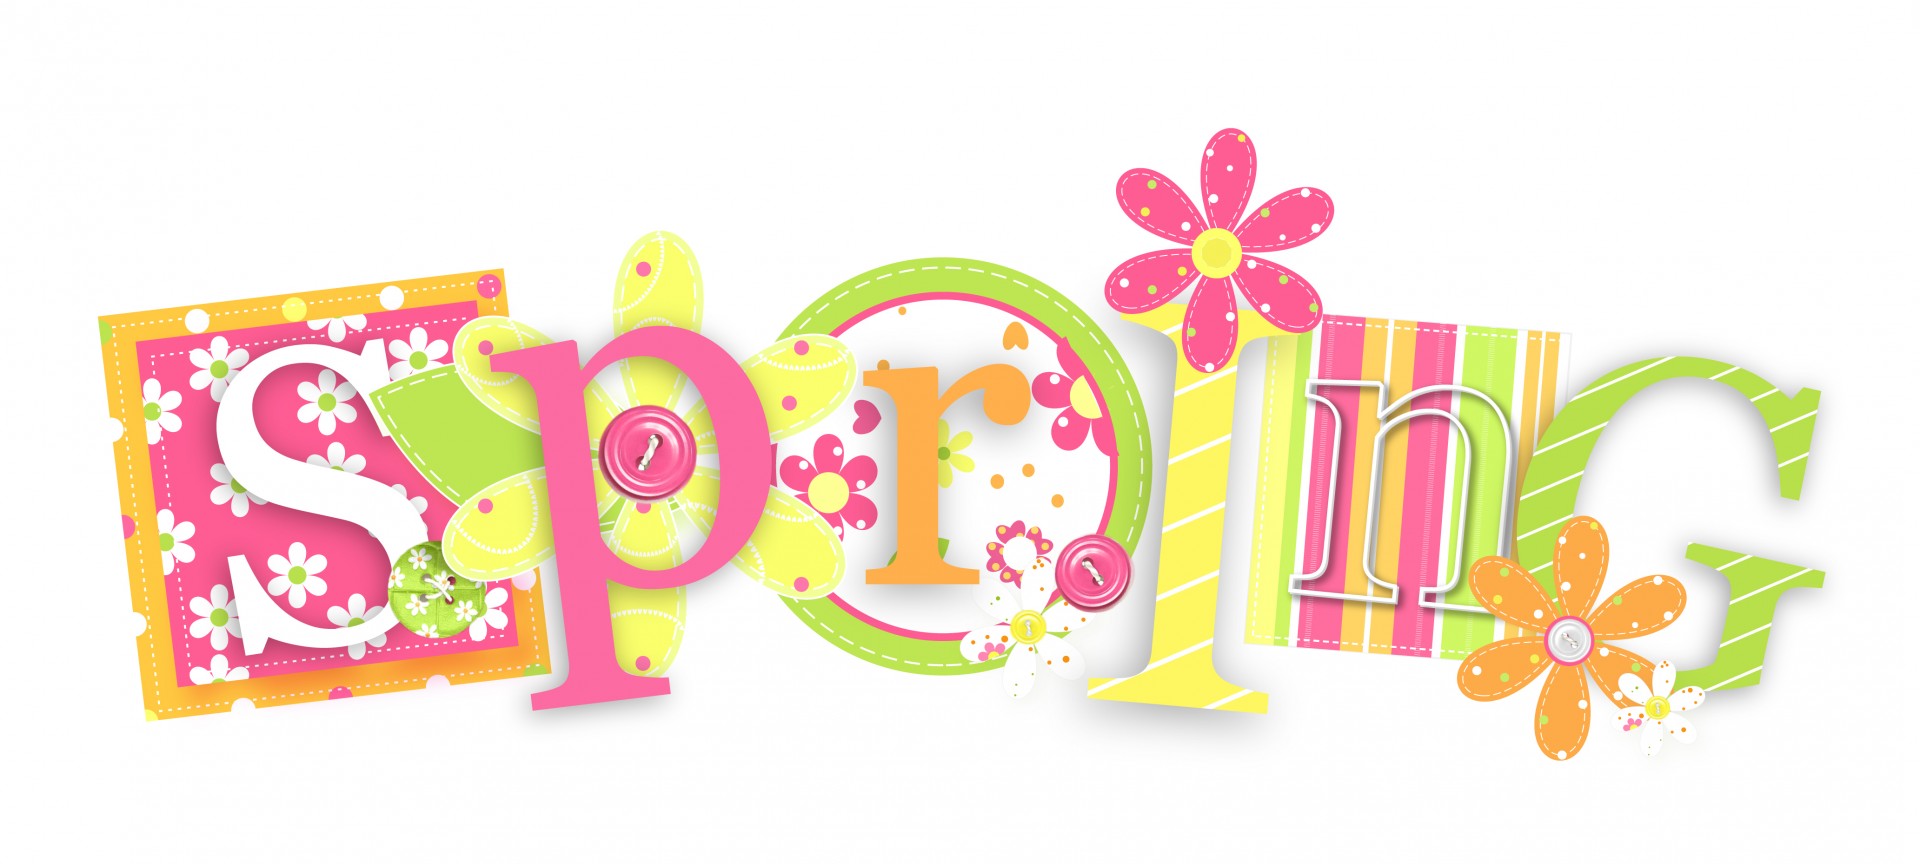 Colorful floral and stripes spring text clipart illustration